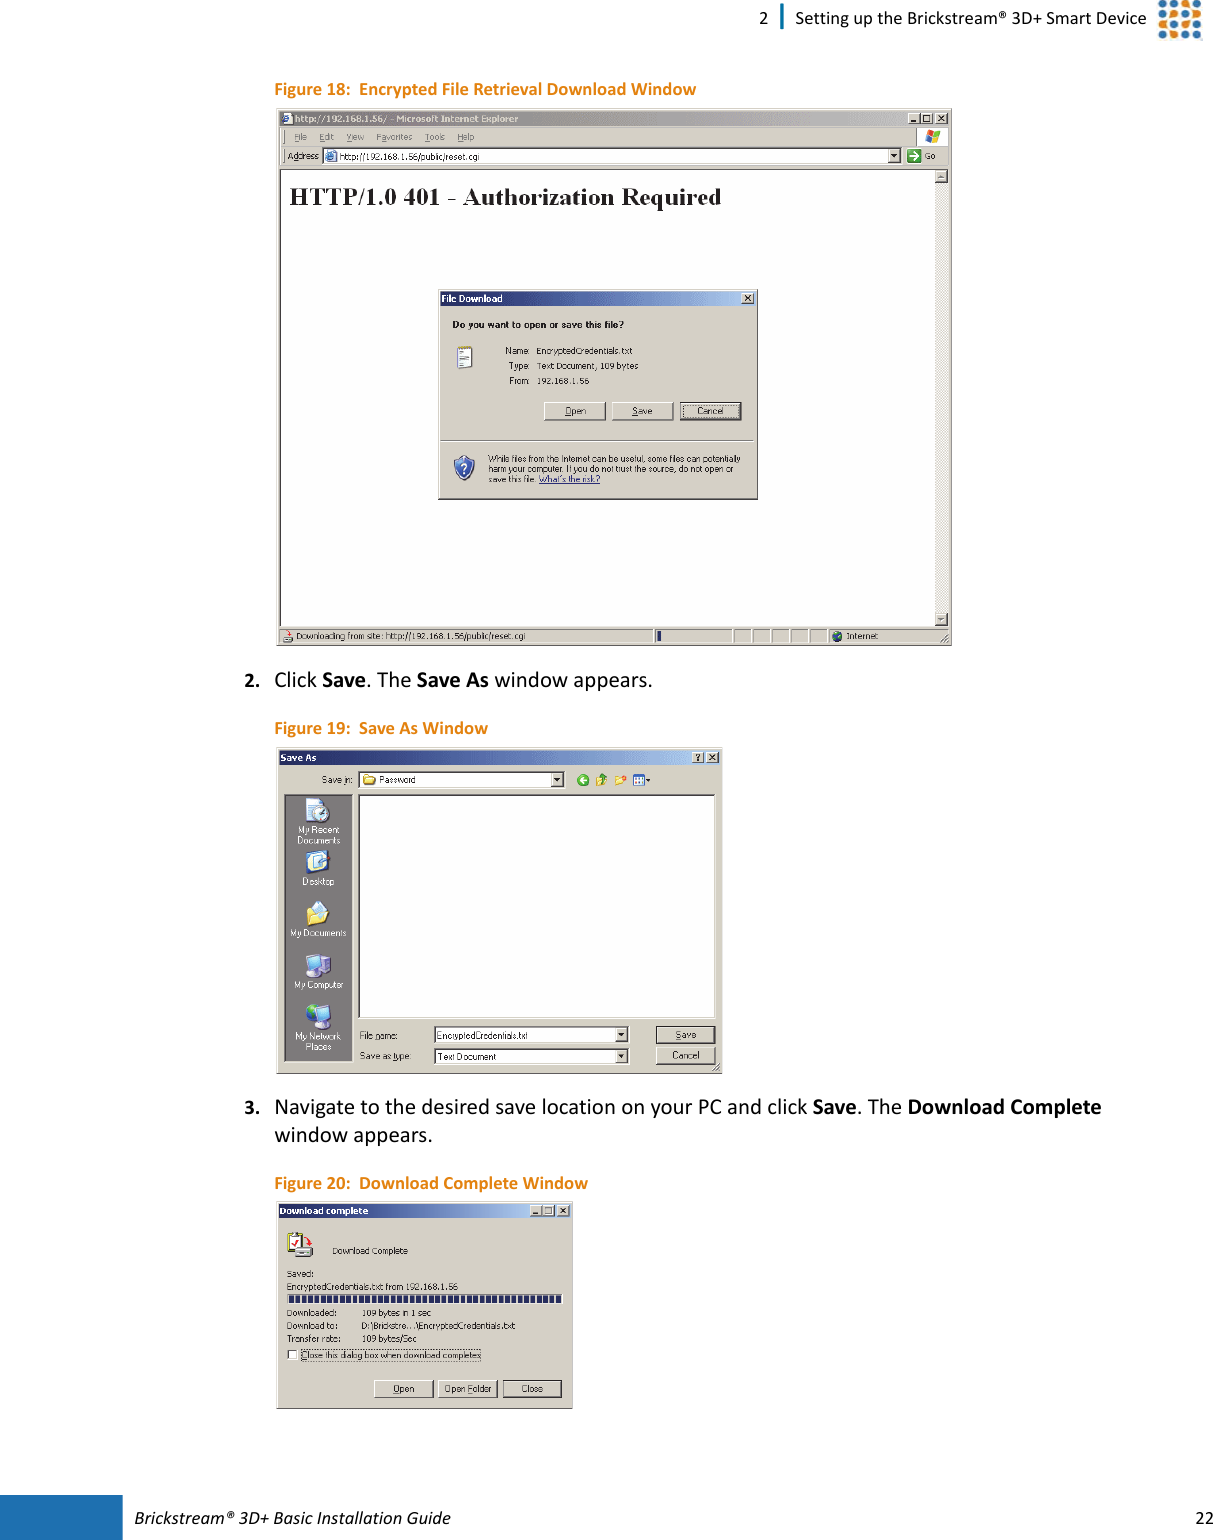 Brickstream®  3D+ Basic Installation Guide 222 | Setting up the Brickstream® 3D+ Smart DeviceFigure 18:  Encrypted File Retrieval Download Window2. Click Save. The Save As window appears. Figure 19:  Save As Window3. Navigate to the desired save location on your PC and click Save. The Download Complete window appears.Figure 20:  Download Complete Window